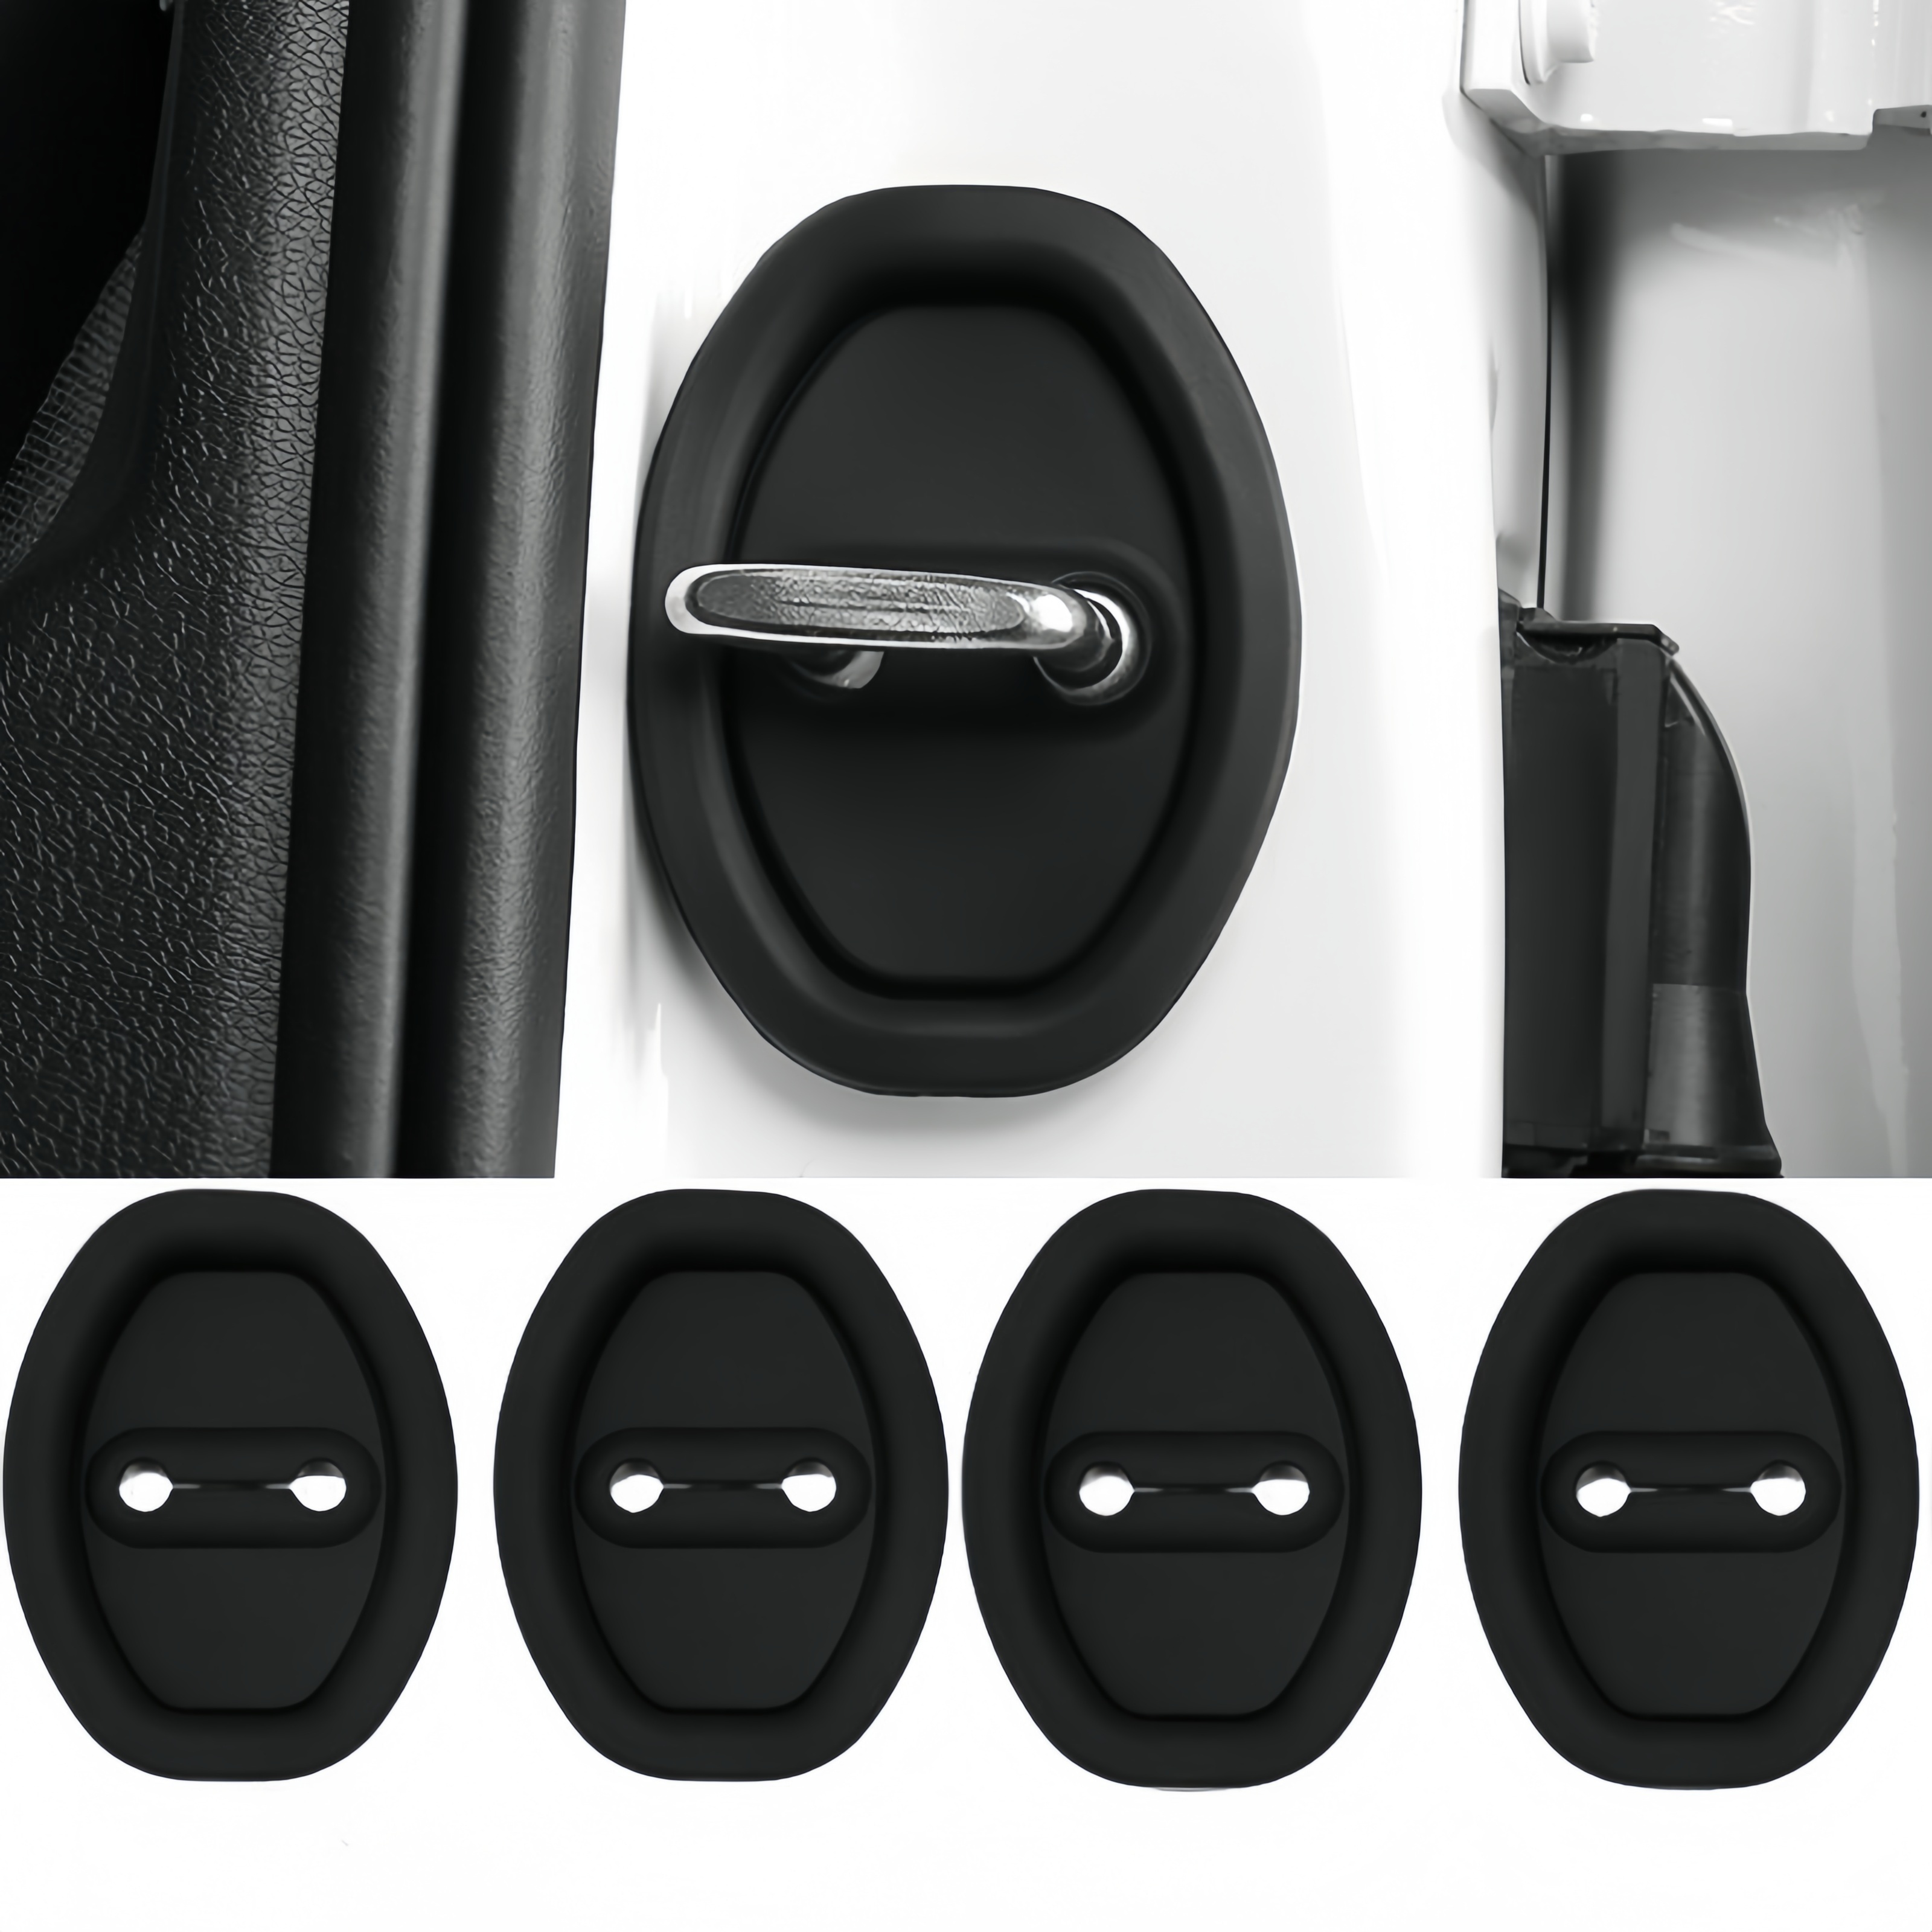 

4pcs Silicone Car Door Lock Buckle Cover Protector, Anti-rust Noise Reduction Interior Accessories For All Models Universal